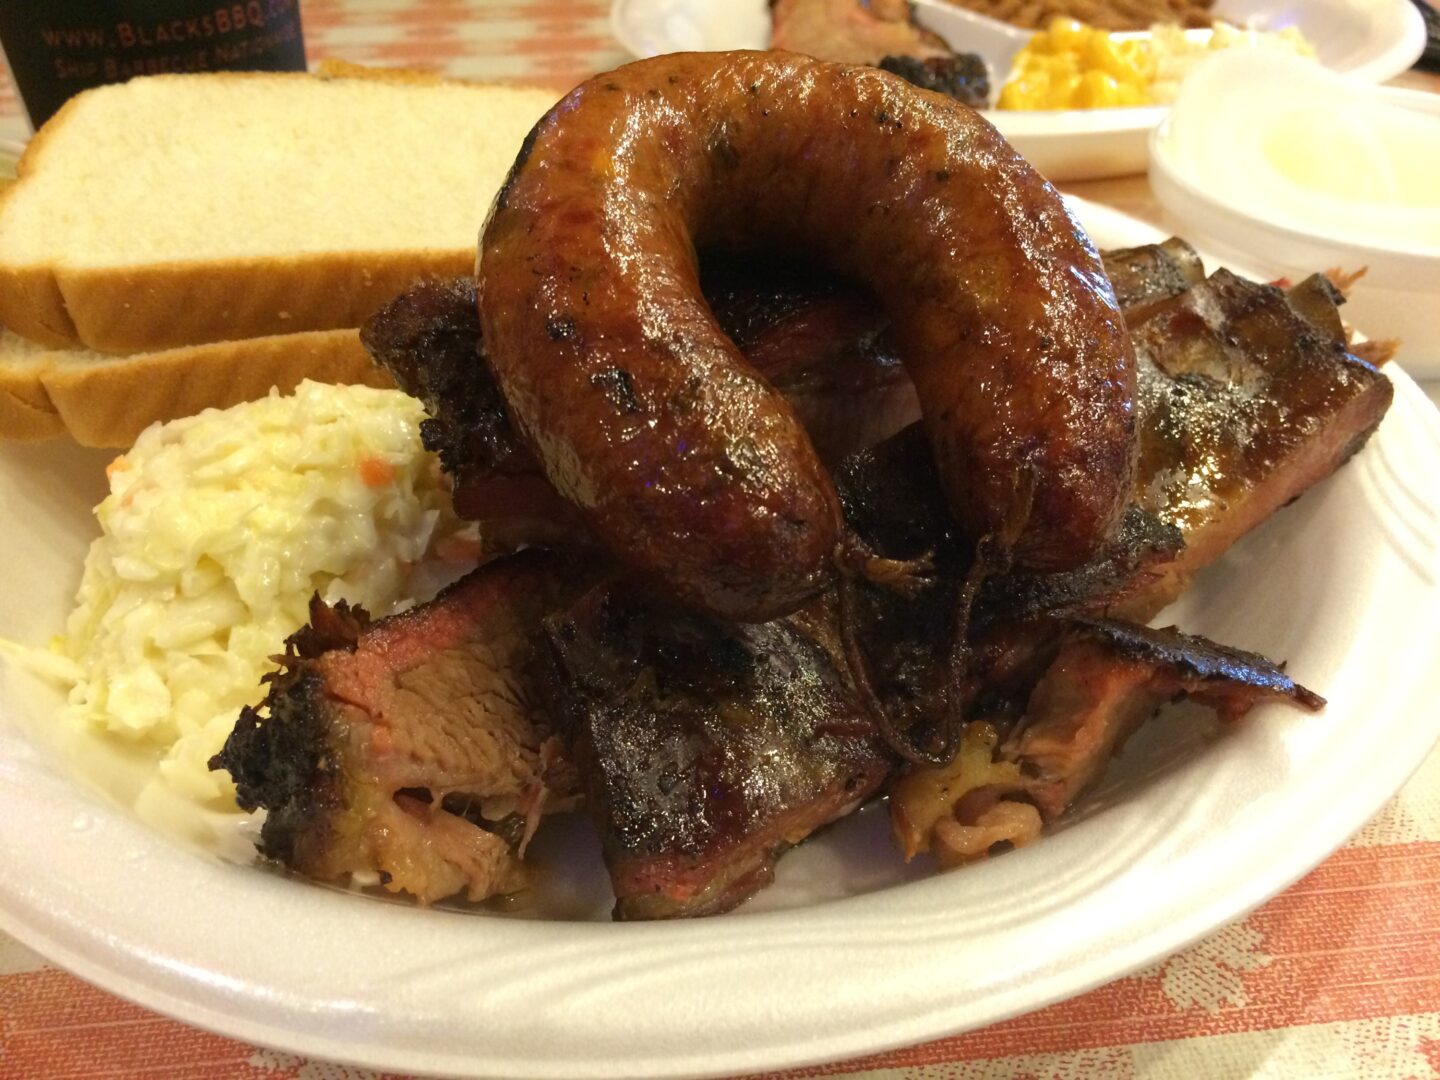 A plate of ribs and sausages.